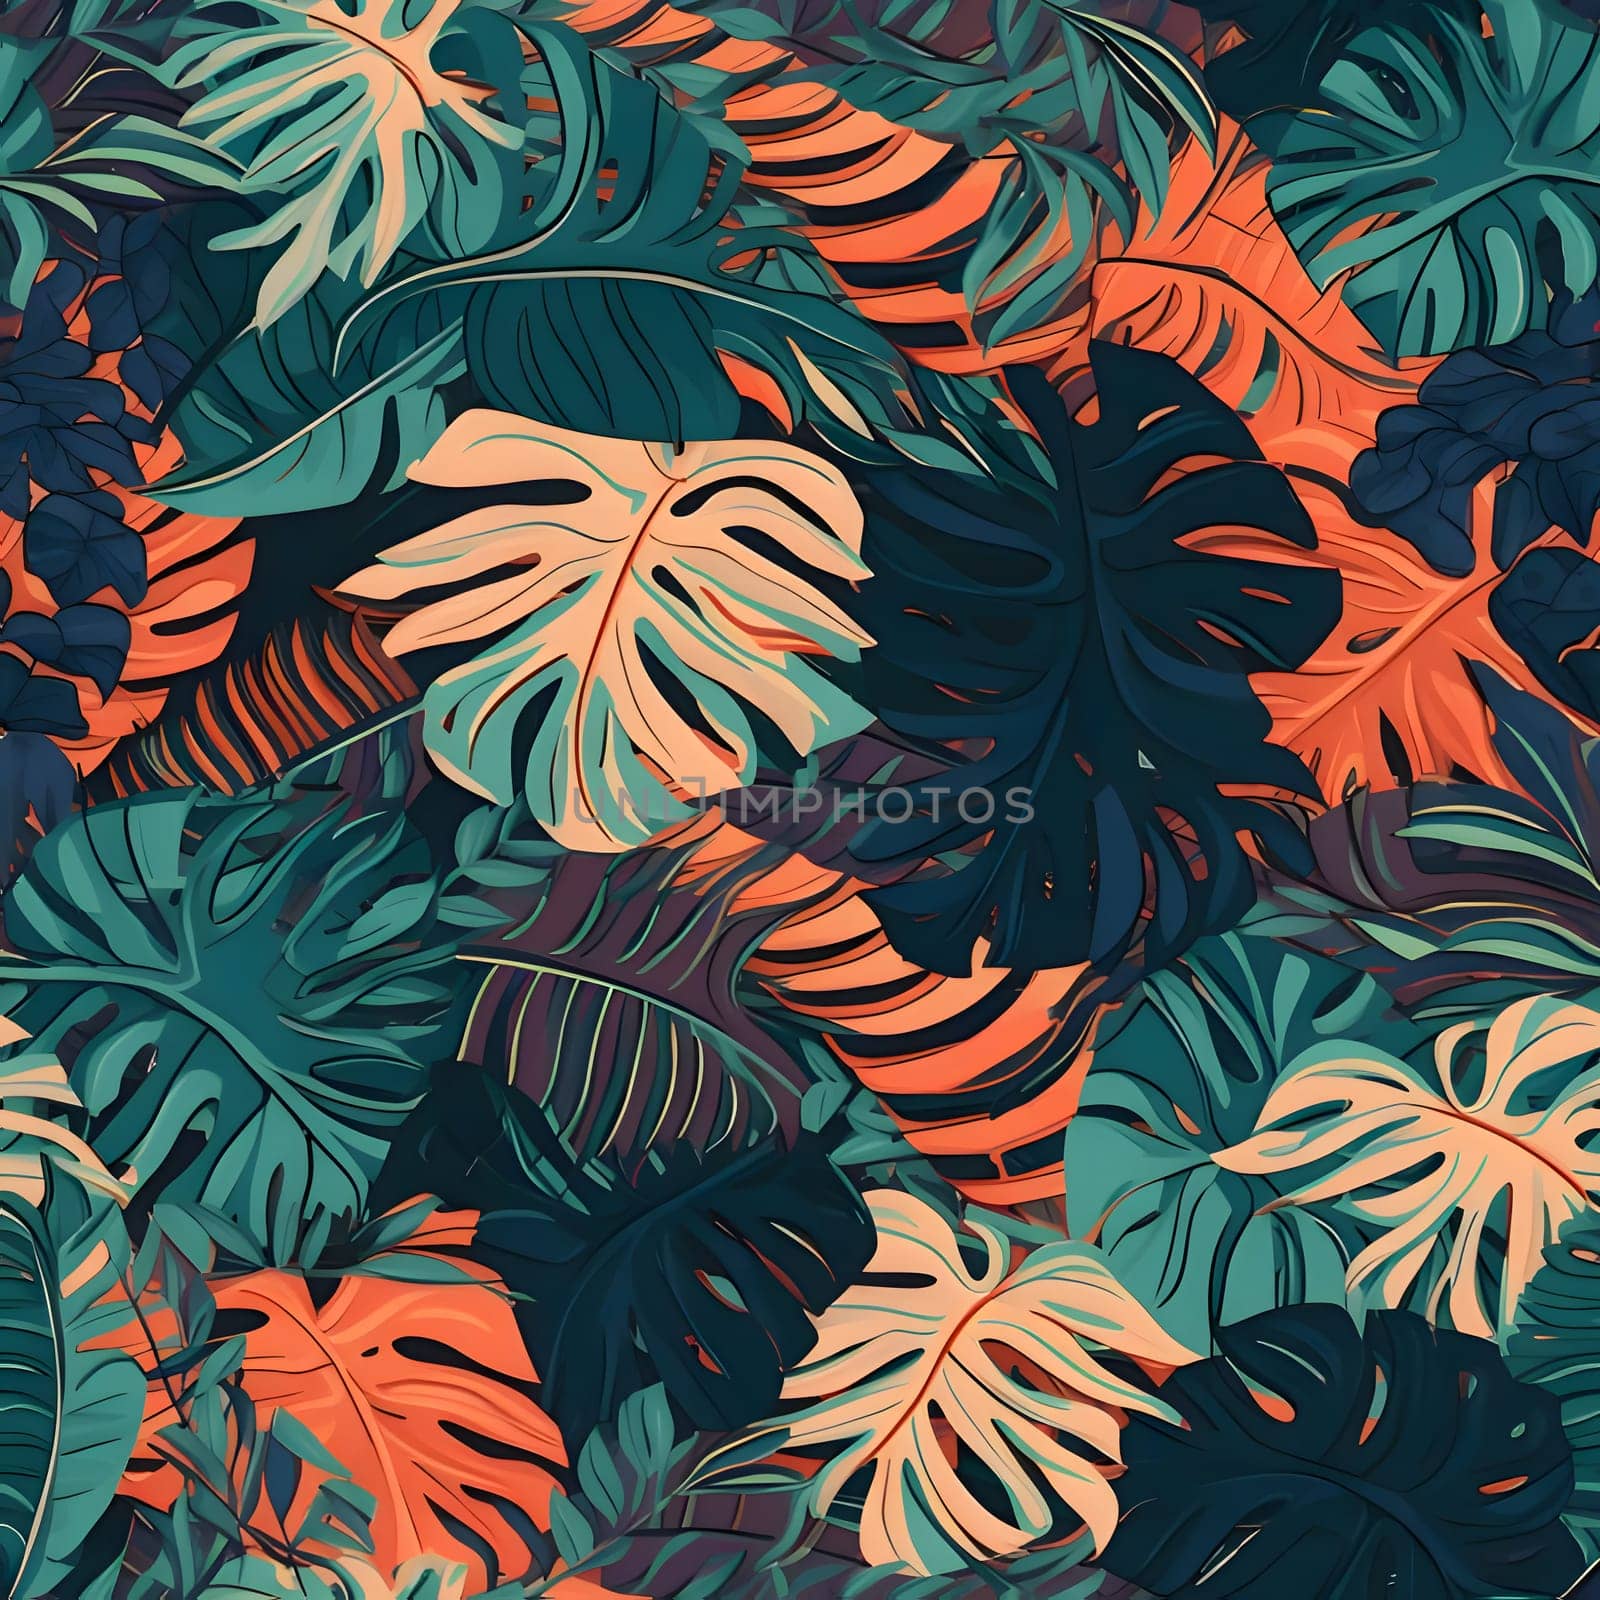 Patterns and banners backgrounds: Seamless pattern with monsters leaves. Tropical background. Vector illustration.